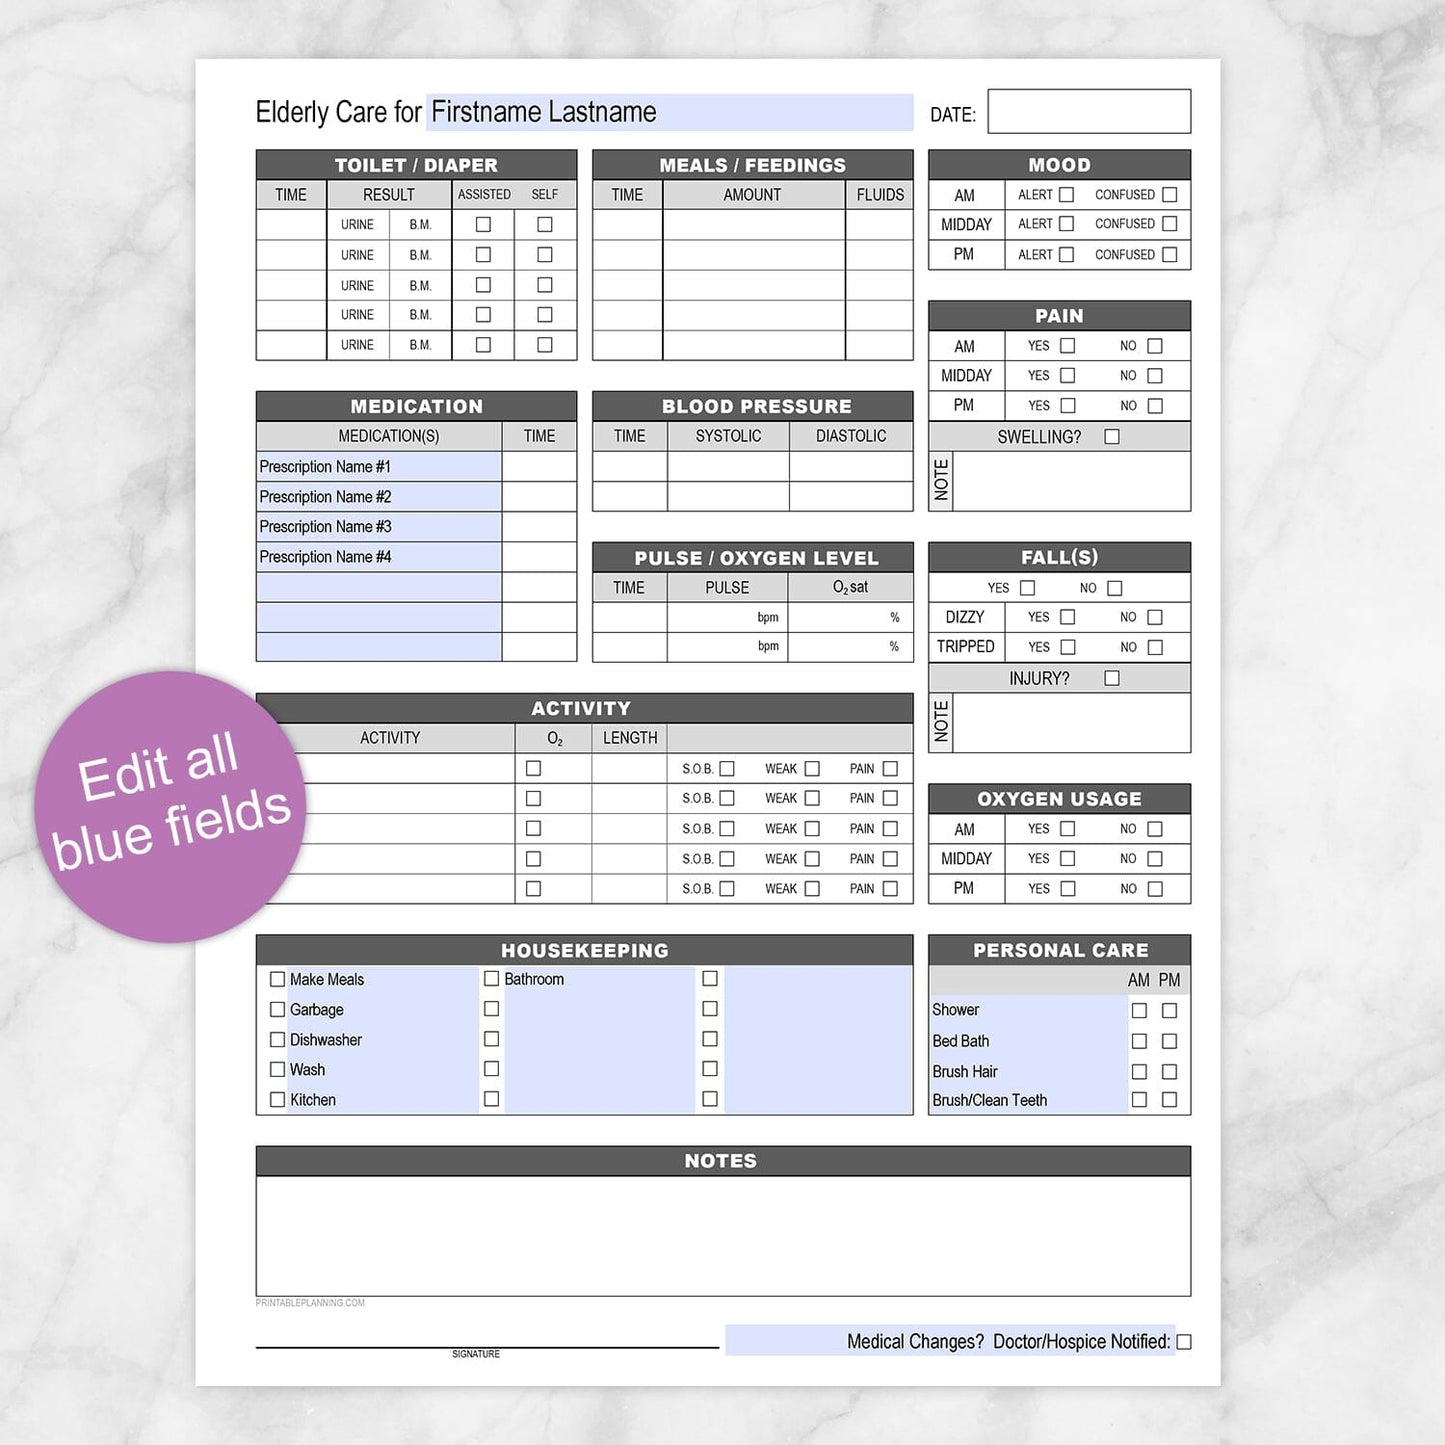 Printable Elderly Care, Daily Care Sheet with Alertness Housekeeping at Printable Planning. Edit all the blue fields of text. 